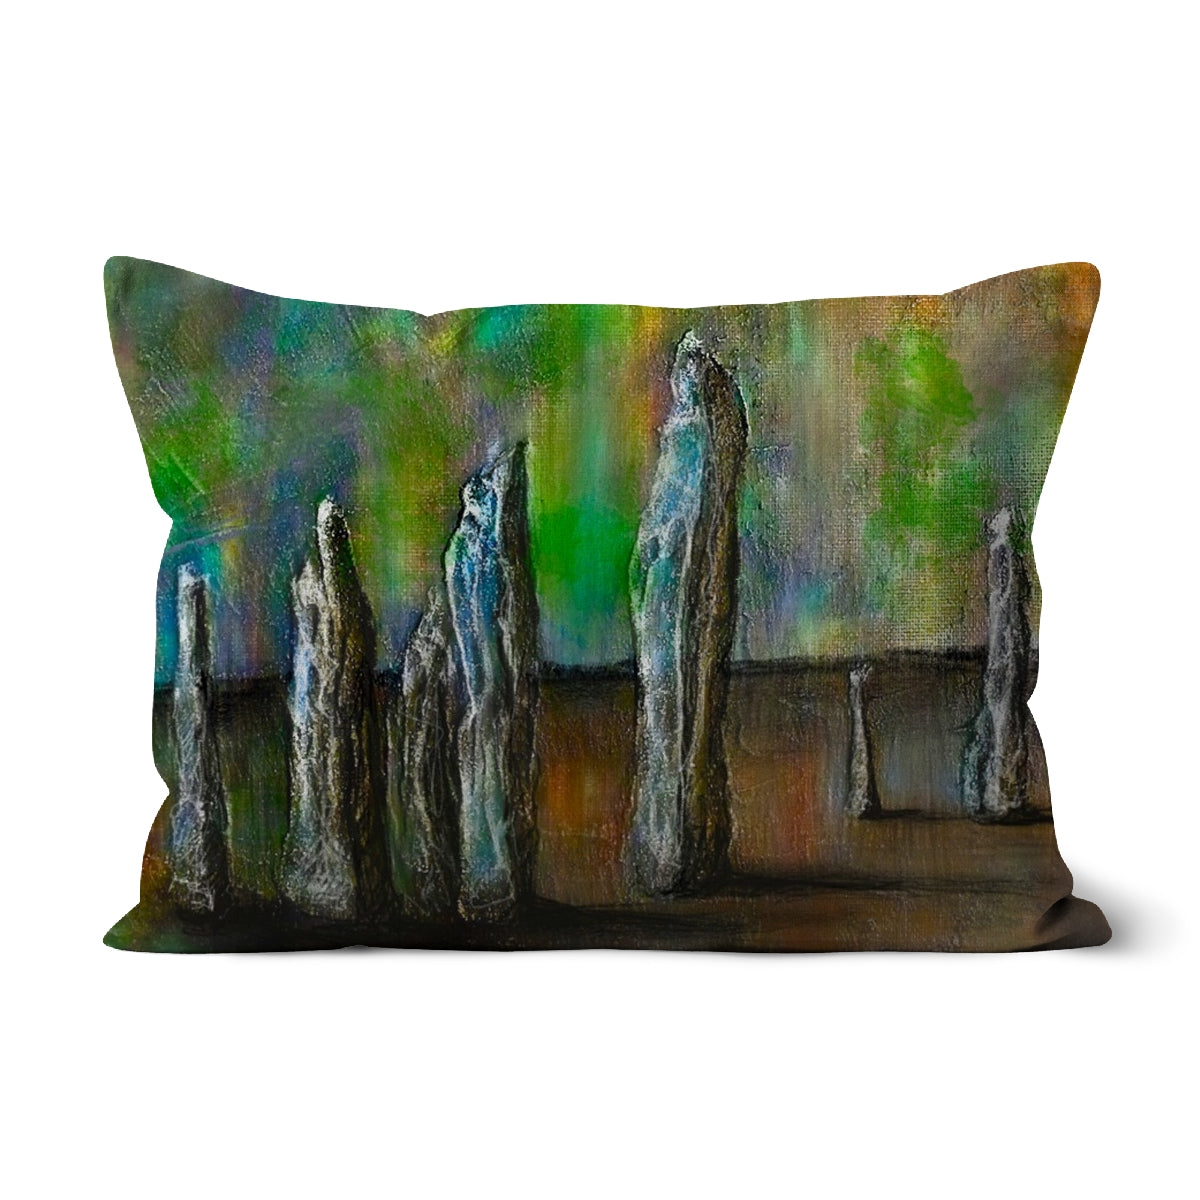 Callanish Northern Lights Art Gifts Cushion-Cushions-Hebridean Islands Art Gallery-Canvas-19"x13"-Paintings, Prints, Homeware, Art Gifts From Scotland By Scottish Artist Kevin Hunter